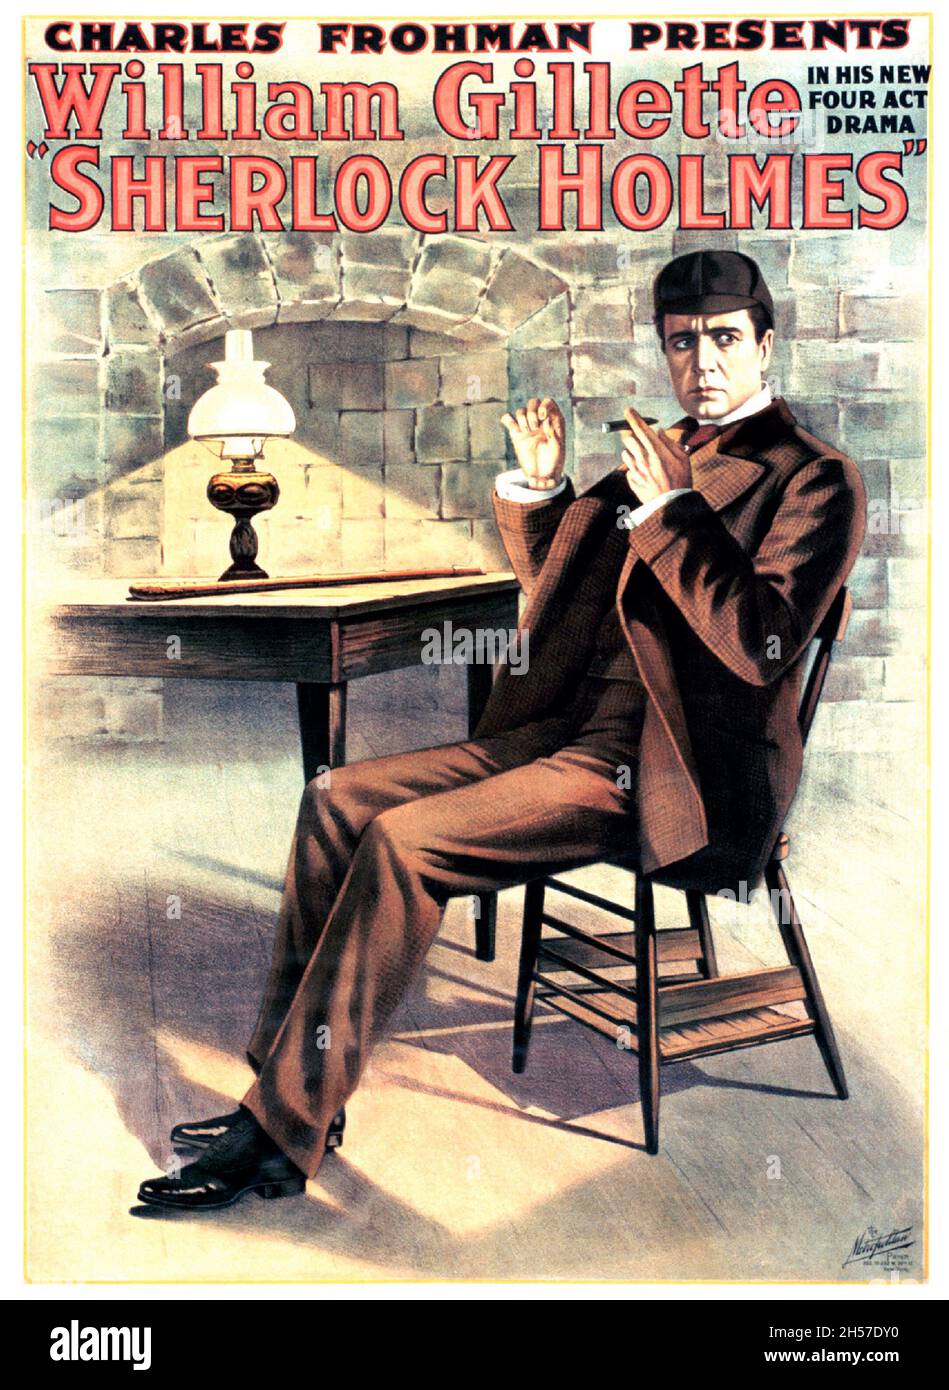 Vintage movie poster for the 1916 film Sherlock Holmes - Old and vintage movie poster feat William Gillette. Presented by Charles Frohman. Stock Photo